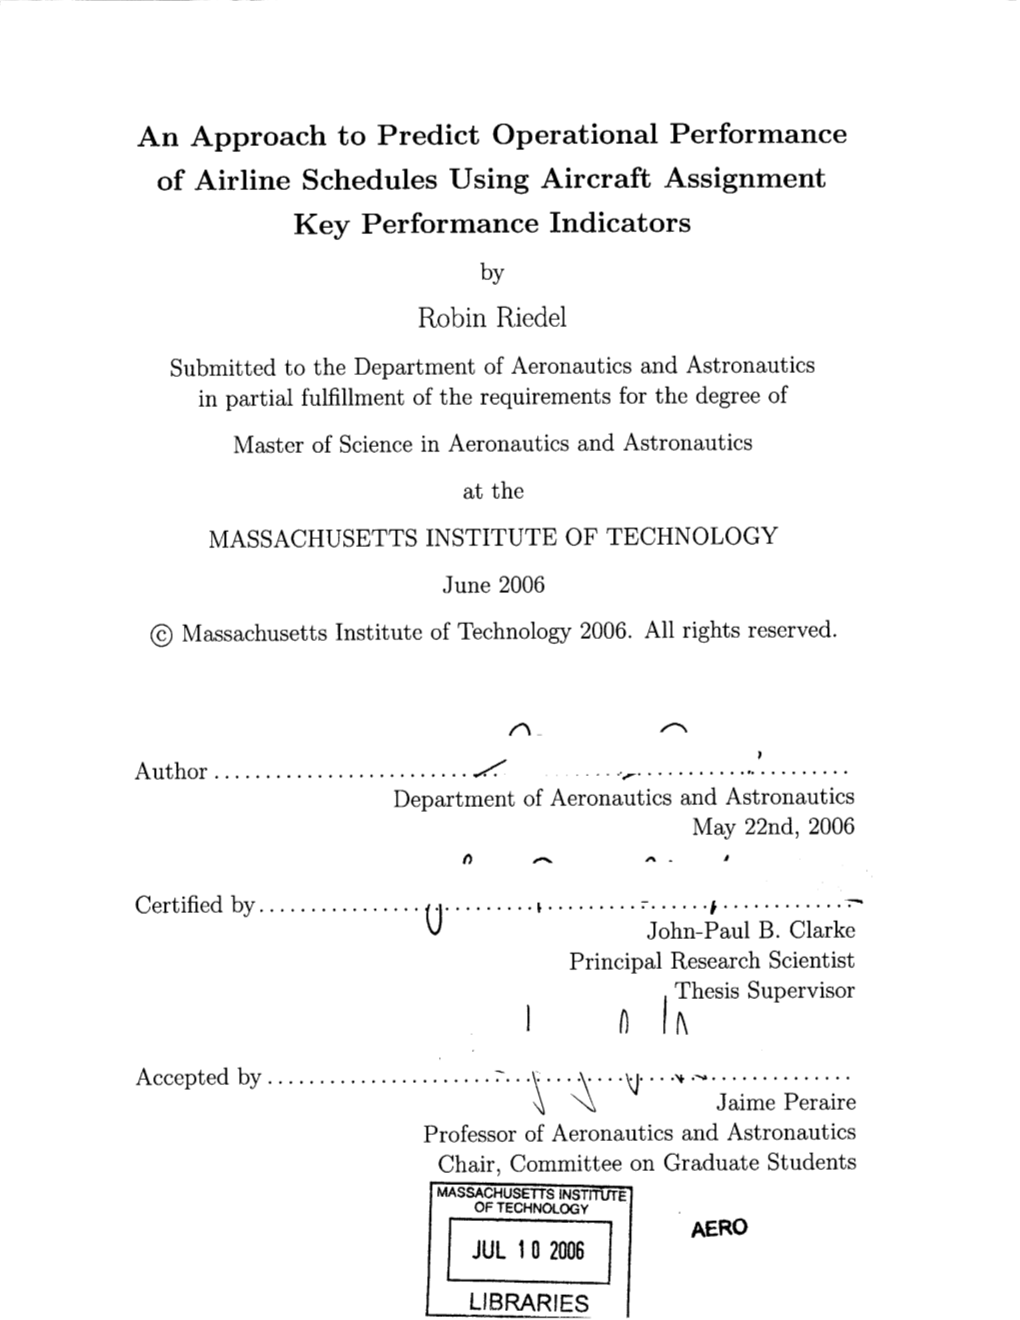 An Approach to Predict Operational Performance of Airline Schedules Using Aircraft Assignment Key Performance Indicators